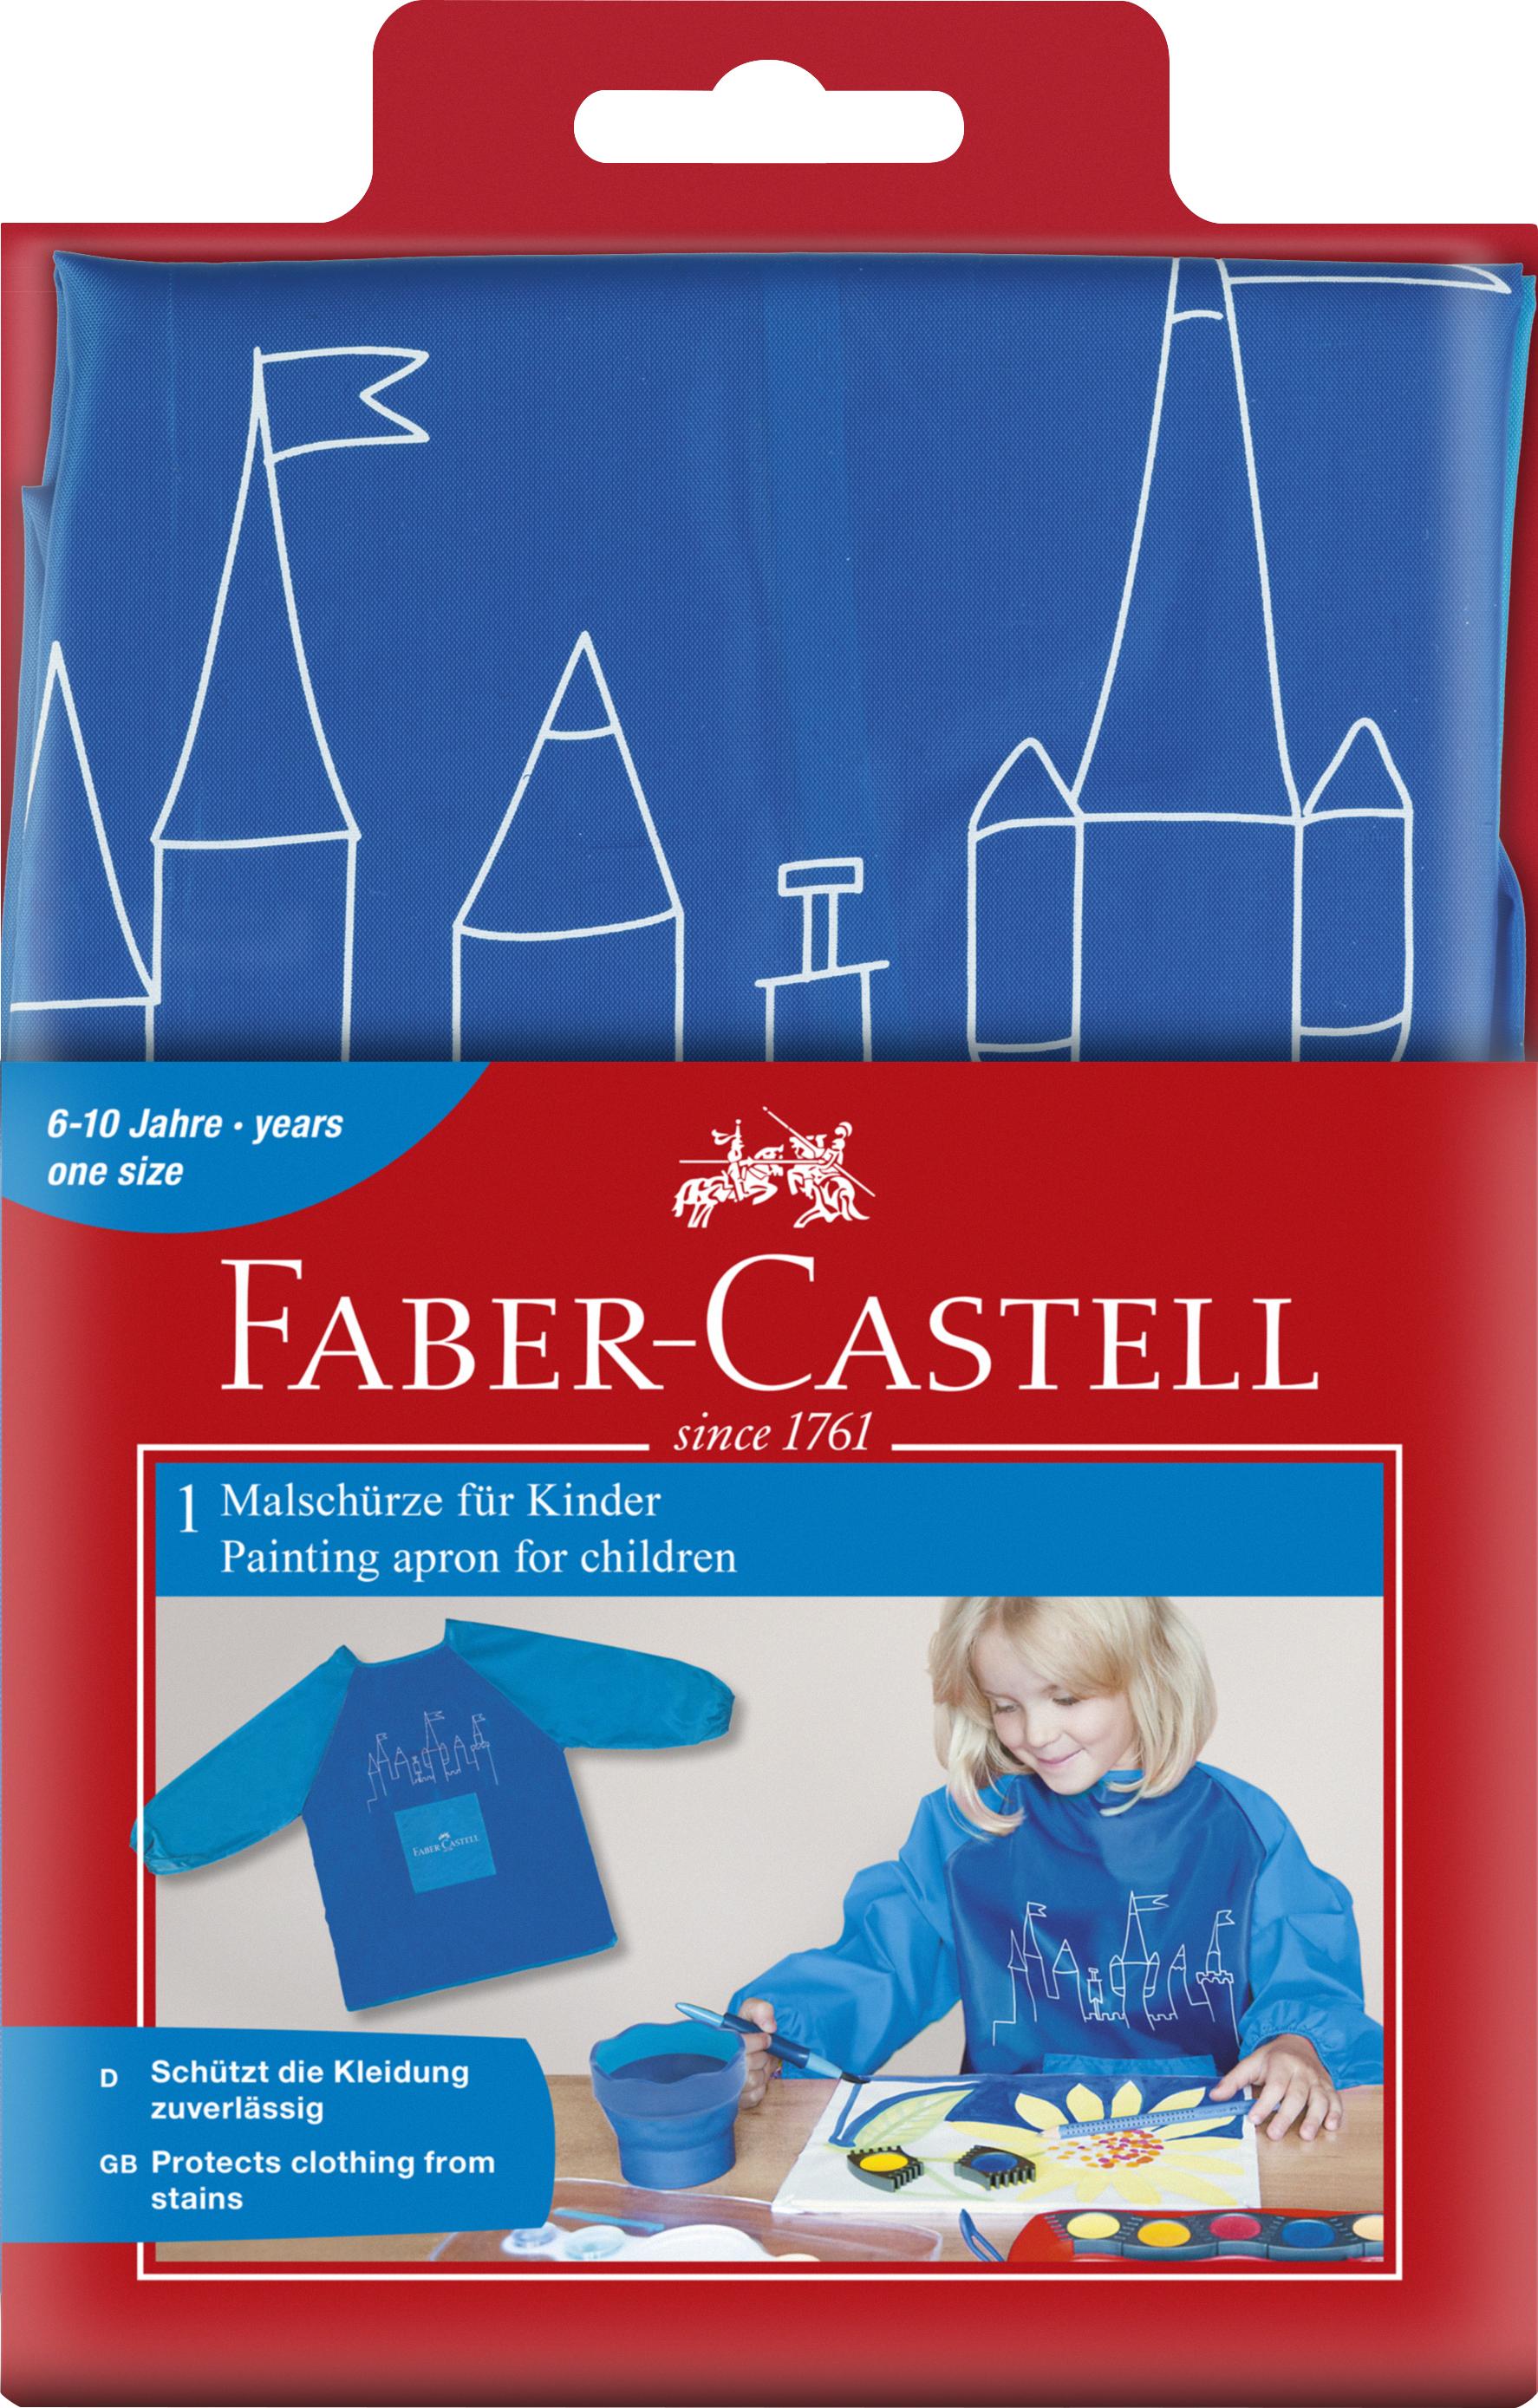 Faber-Castell - Painting apron 4 young artist Blue (201203)